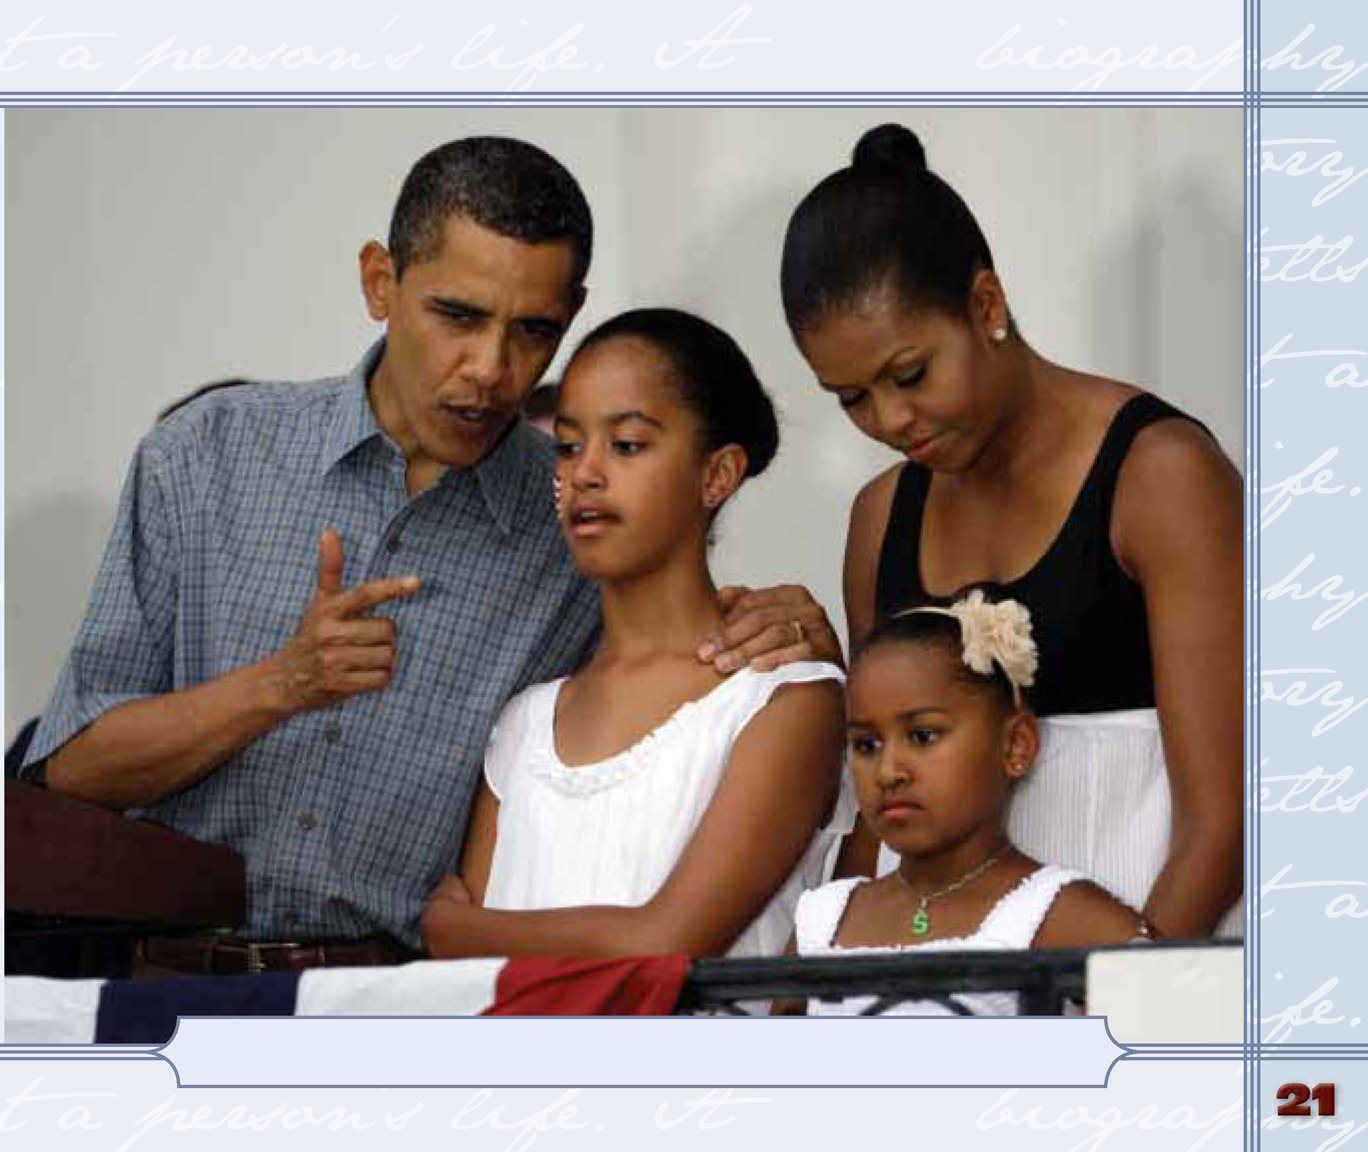 The Obamas spend family time together in the White House college KOL-ij - photo 23